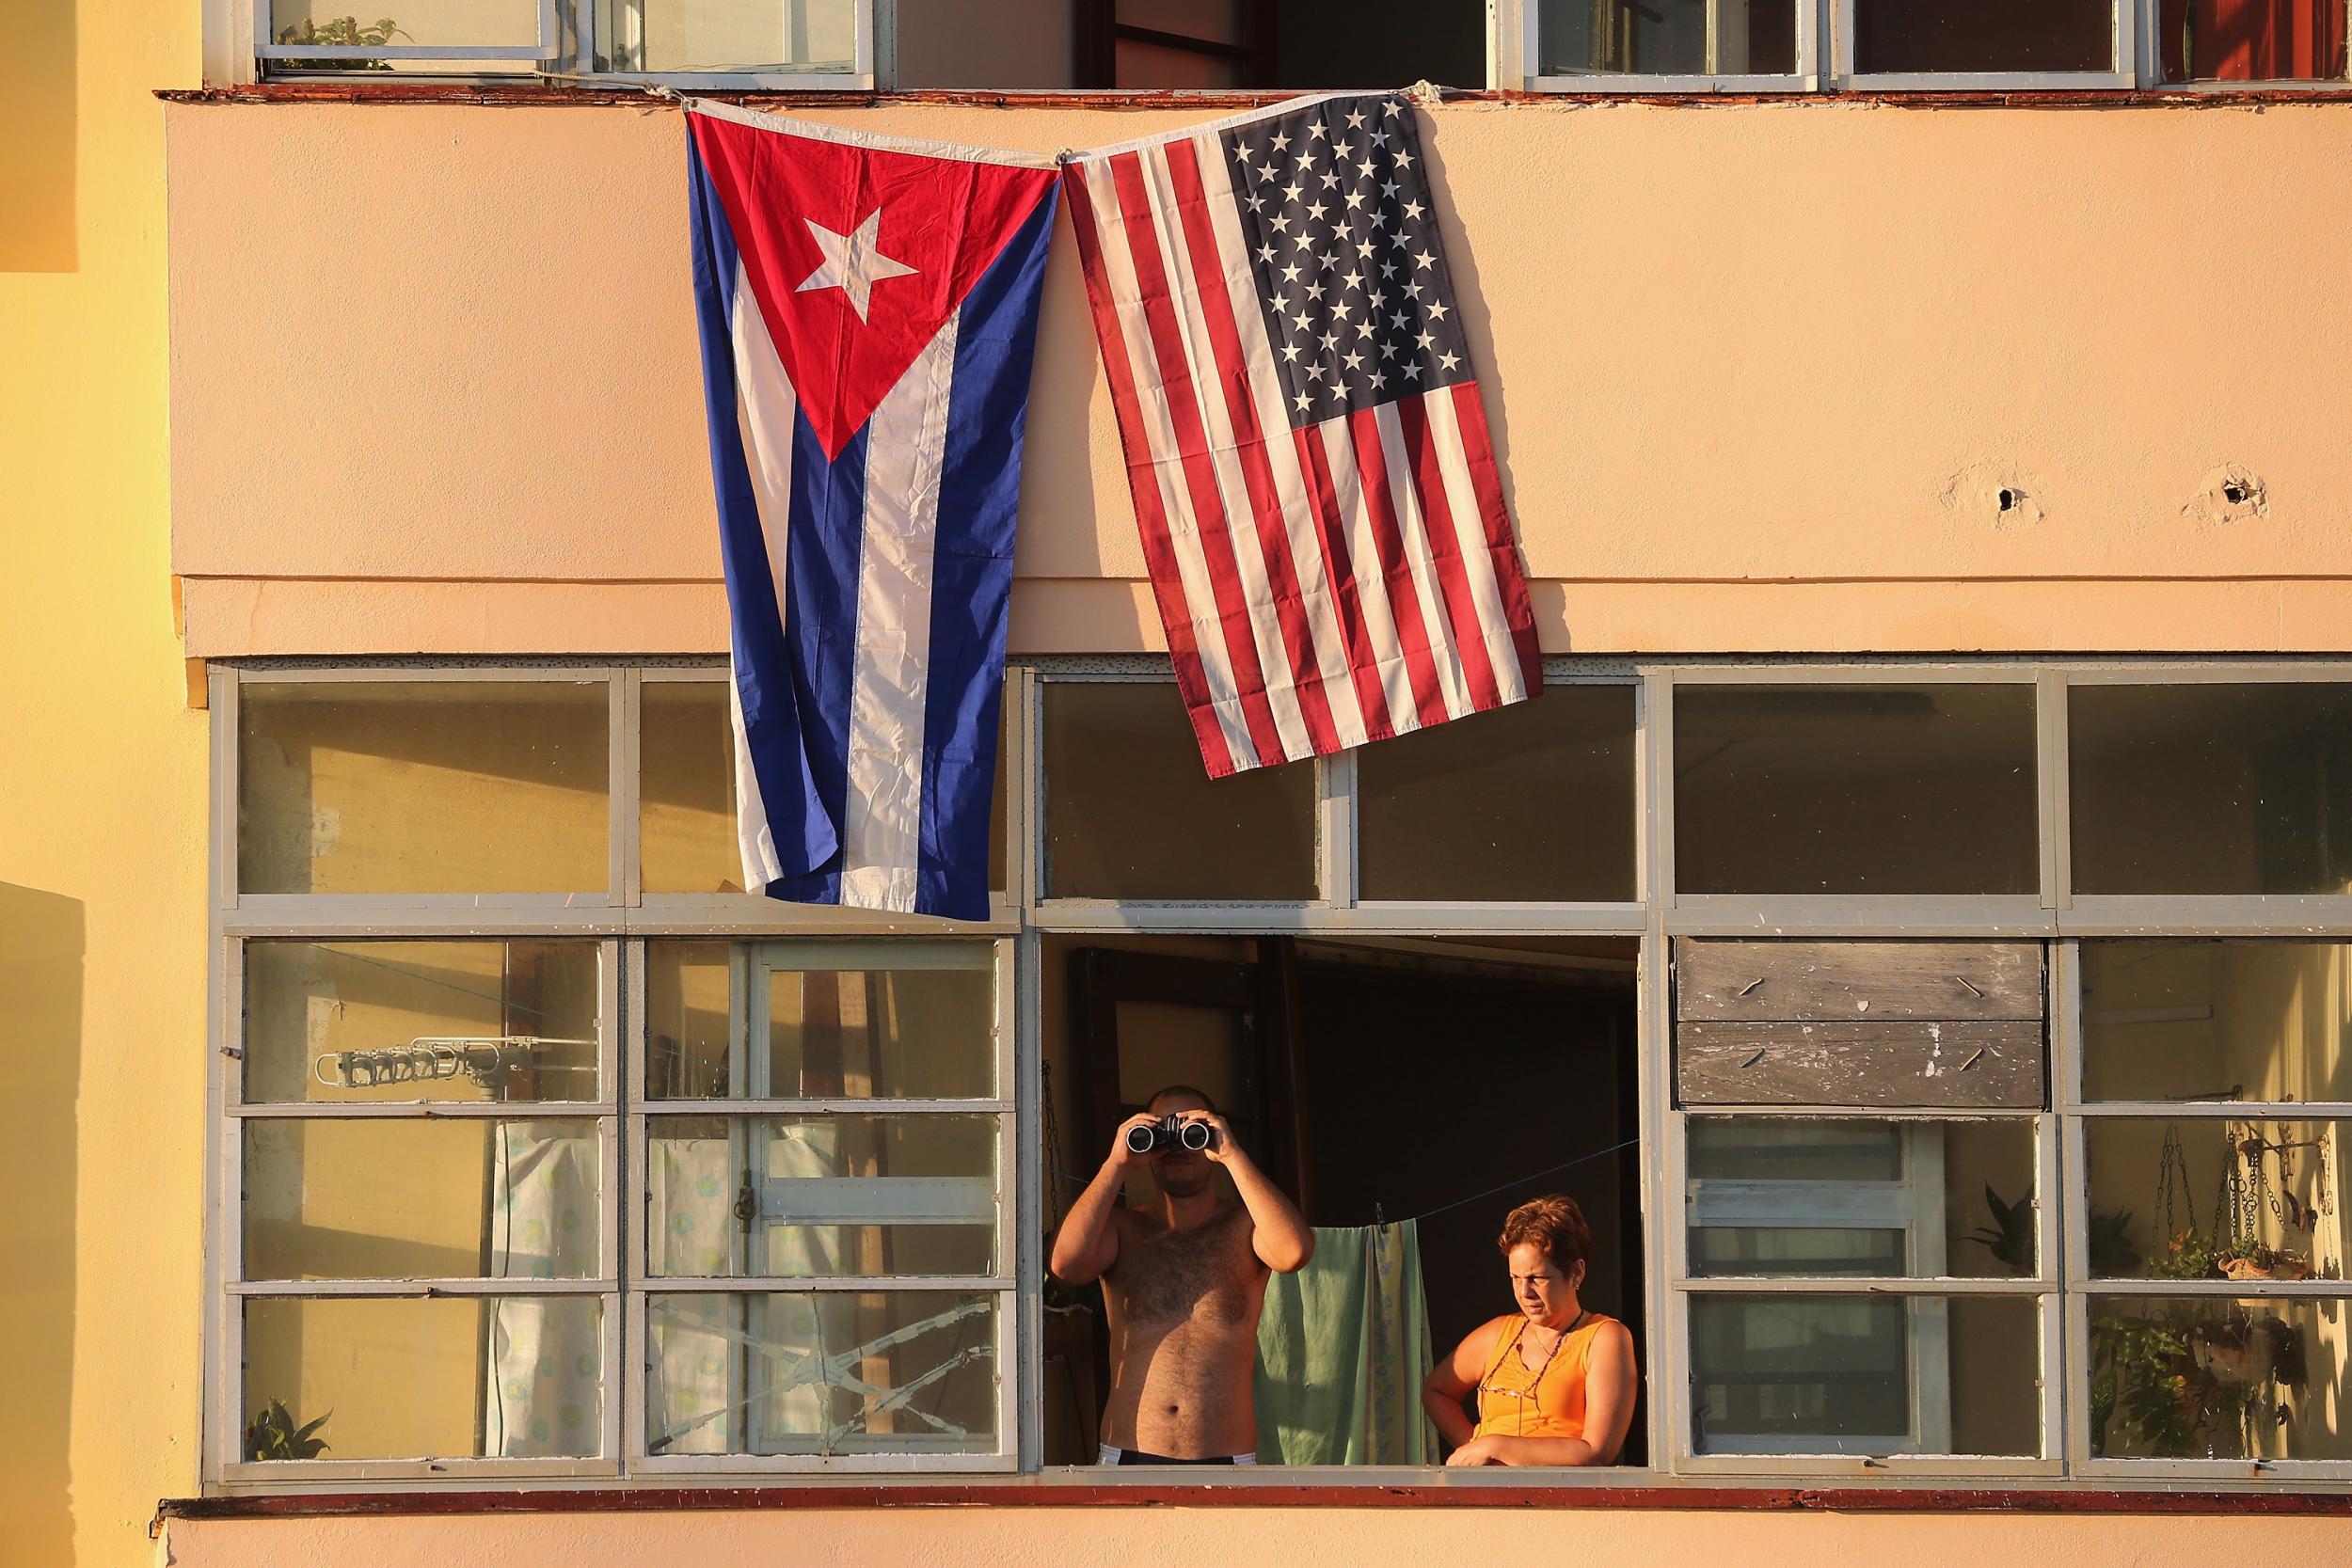 The US reopened its embassy in Cuba earlier this year